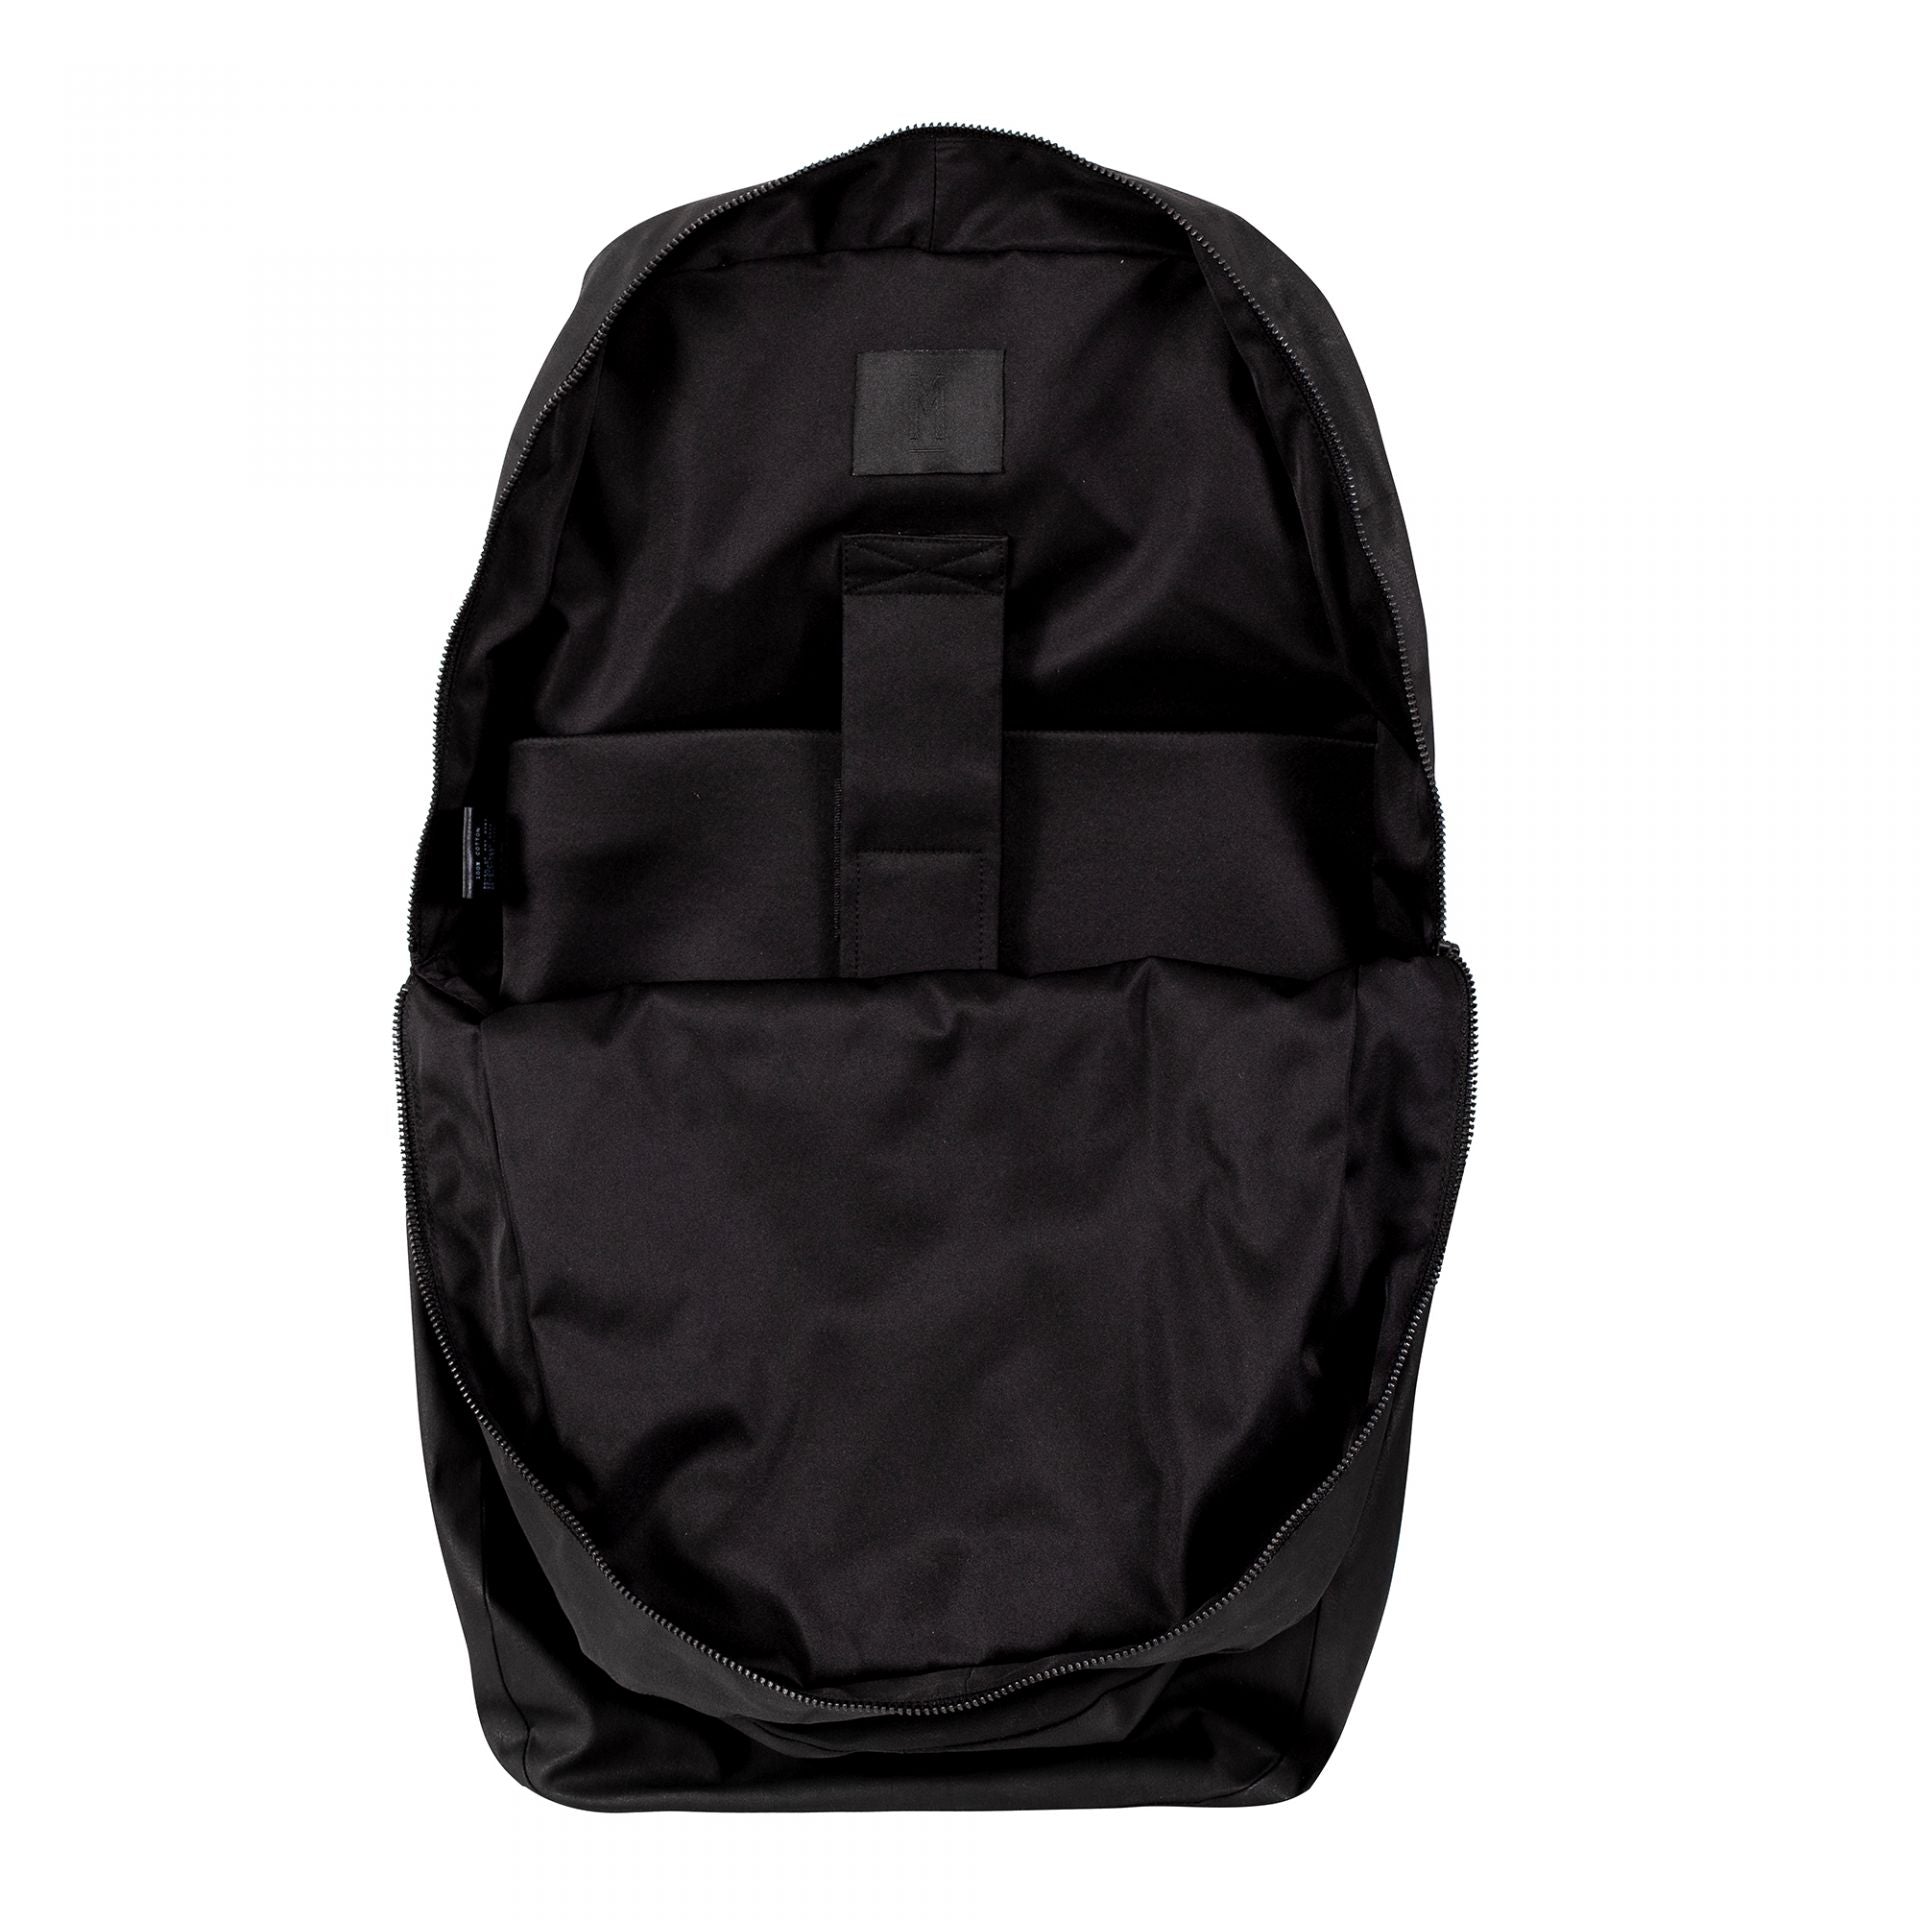 ROUND SHAPED BACKPACK IN BLACK